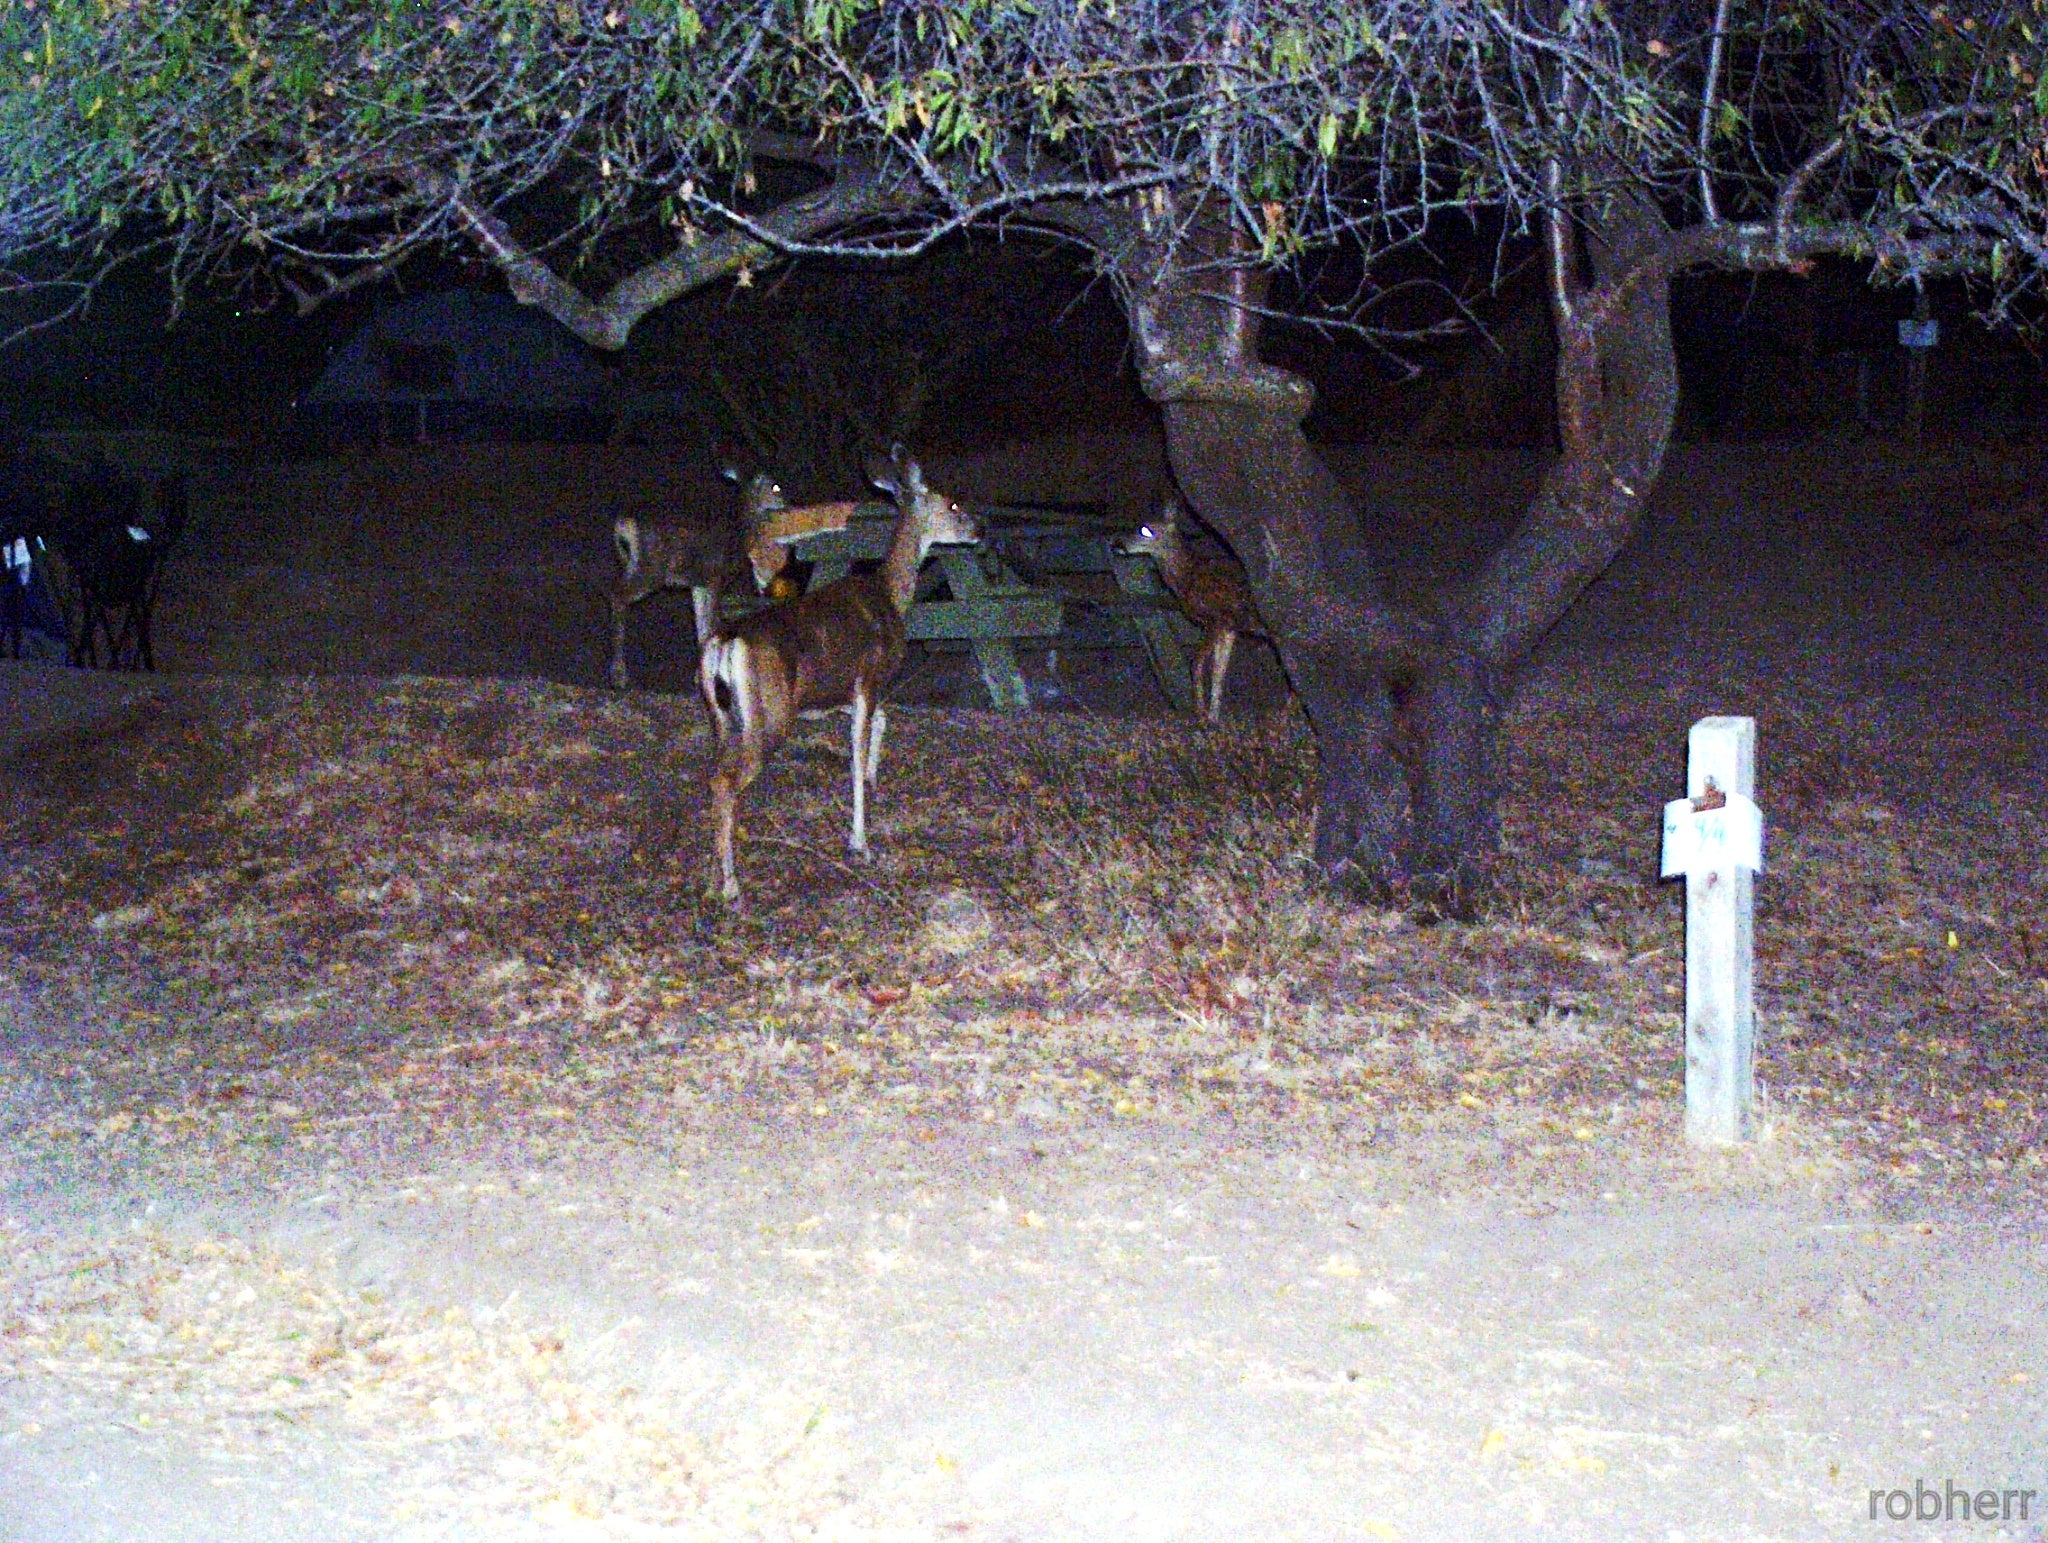 Deer come through the campsites